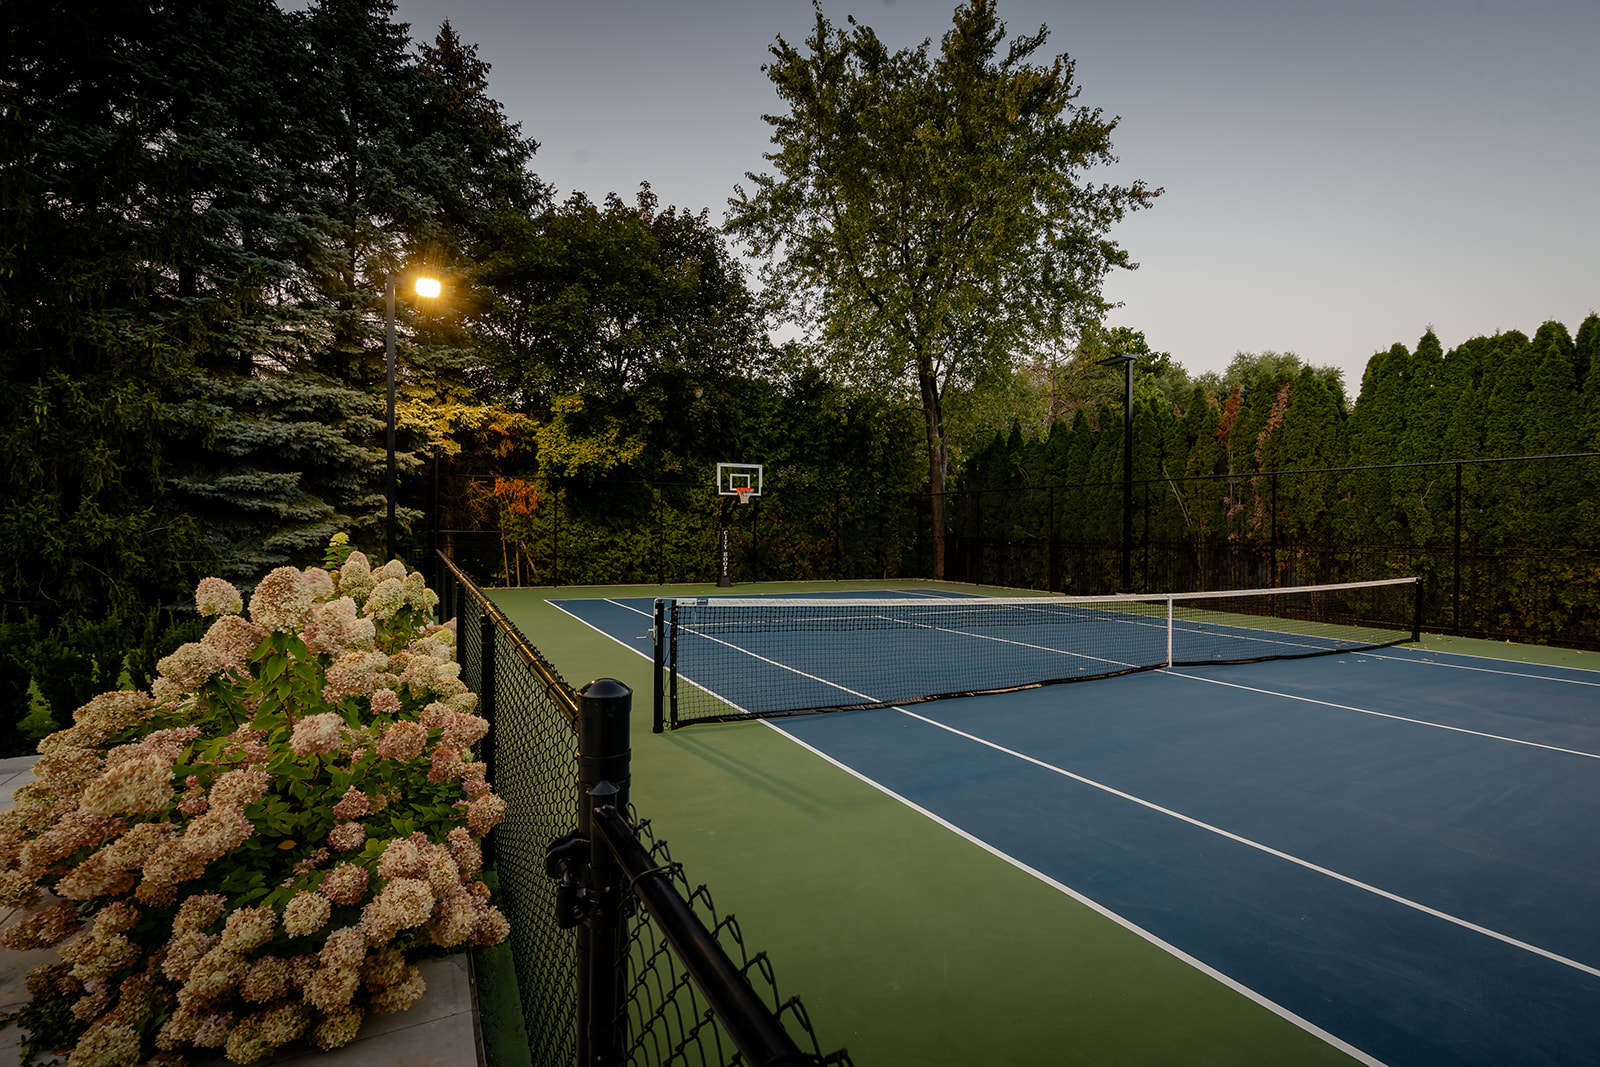 A large tennis court in the backyard.